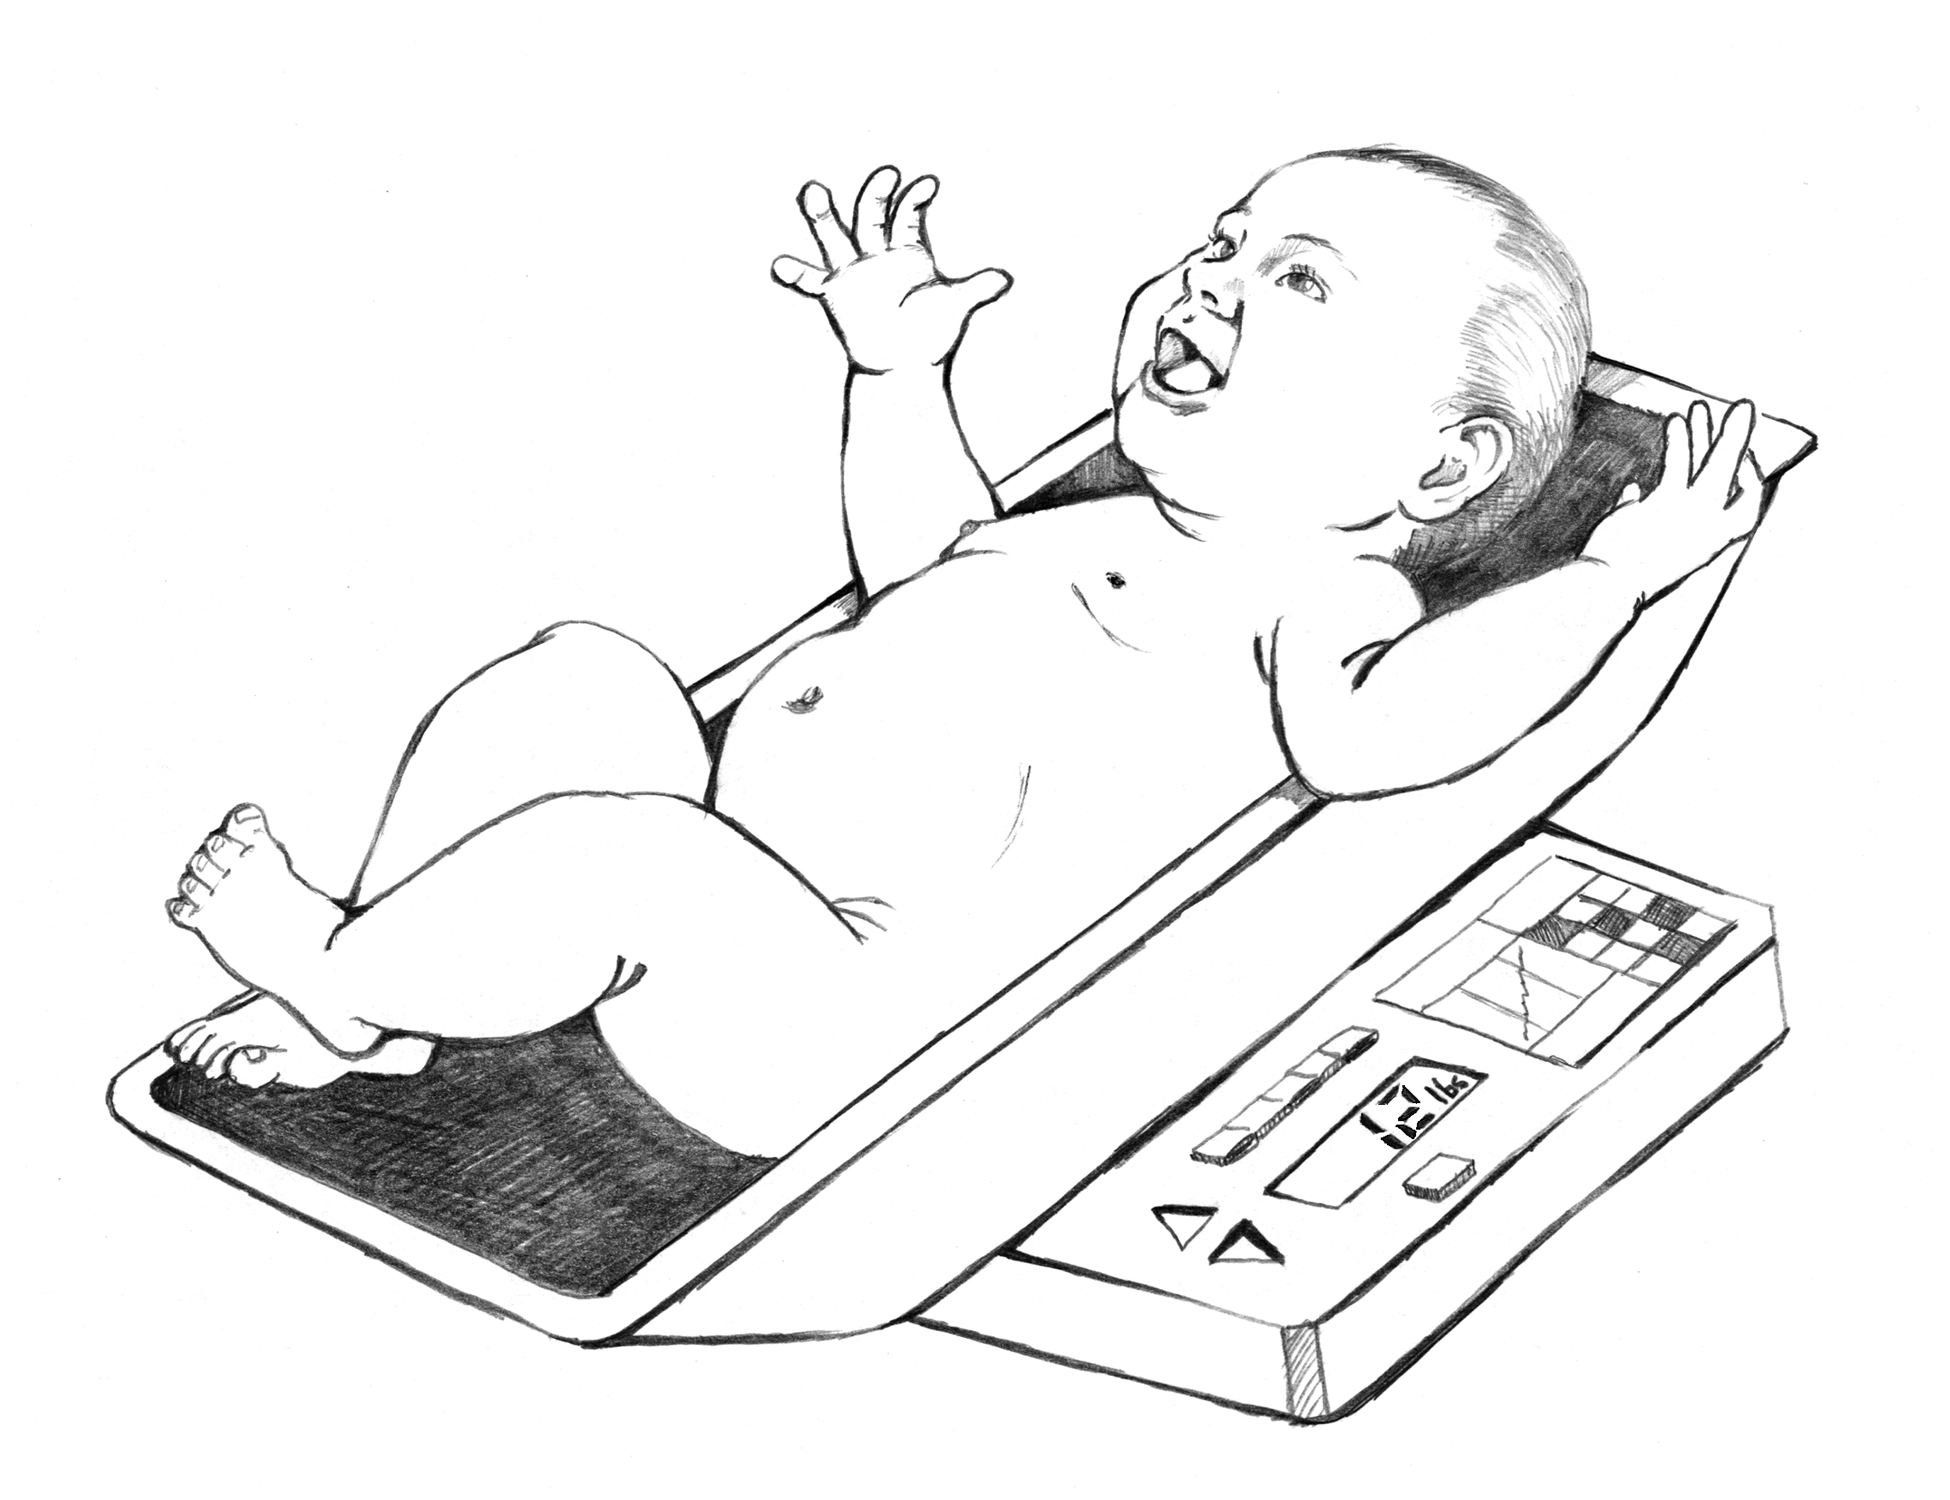 Newborn baby being weighed on a baby scale - Media Asset - NIDDK